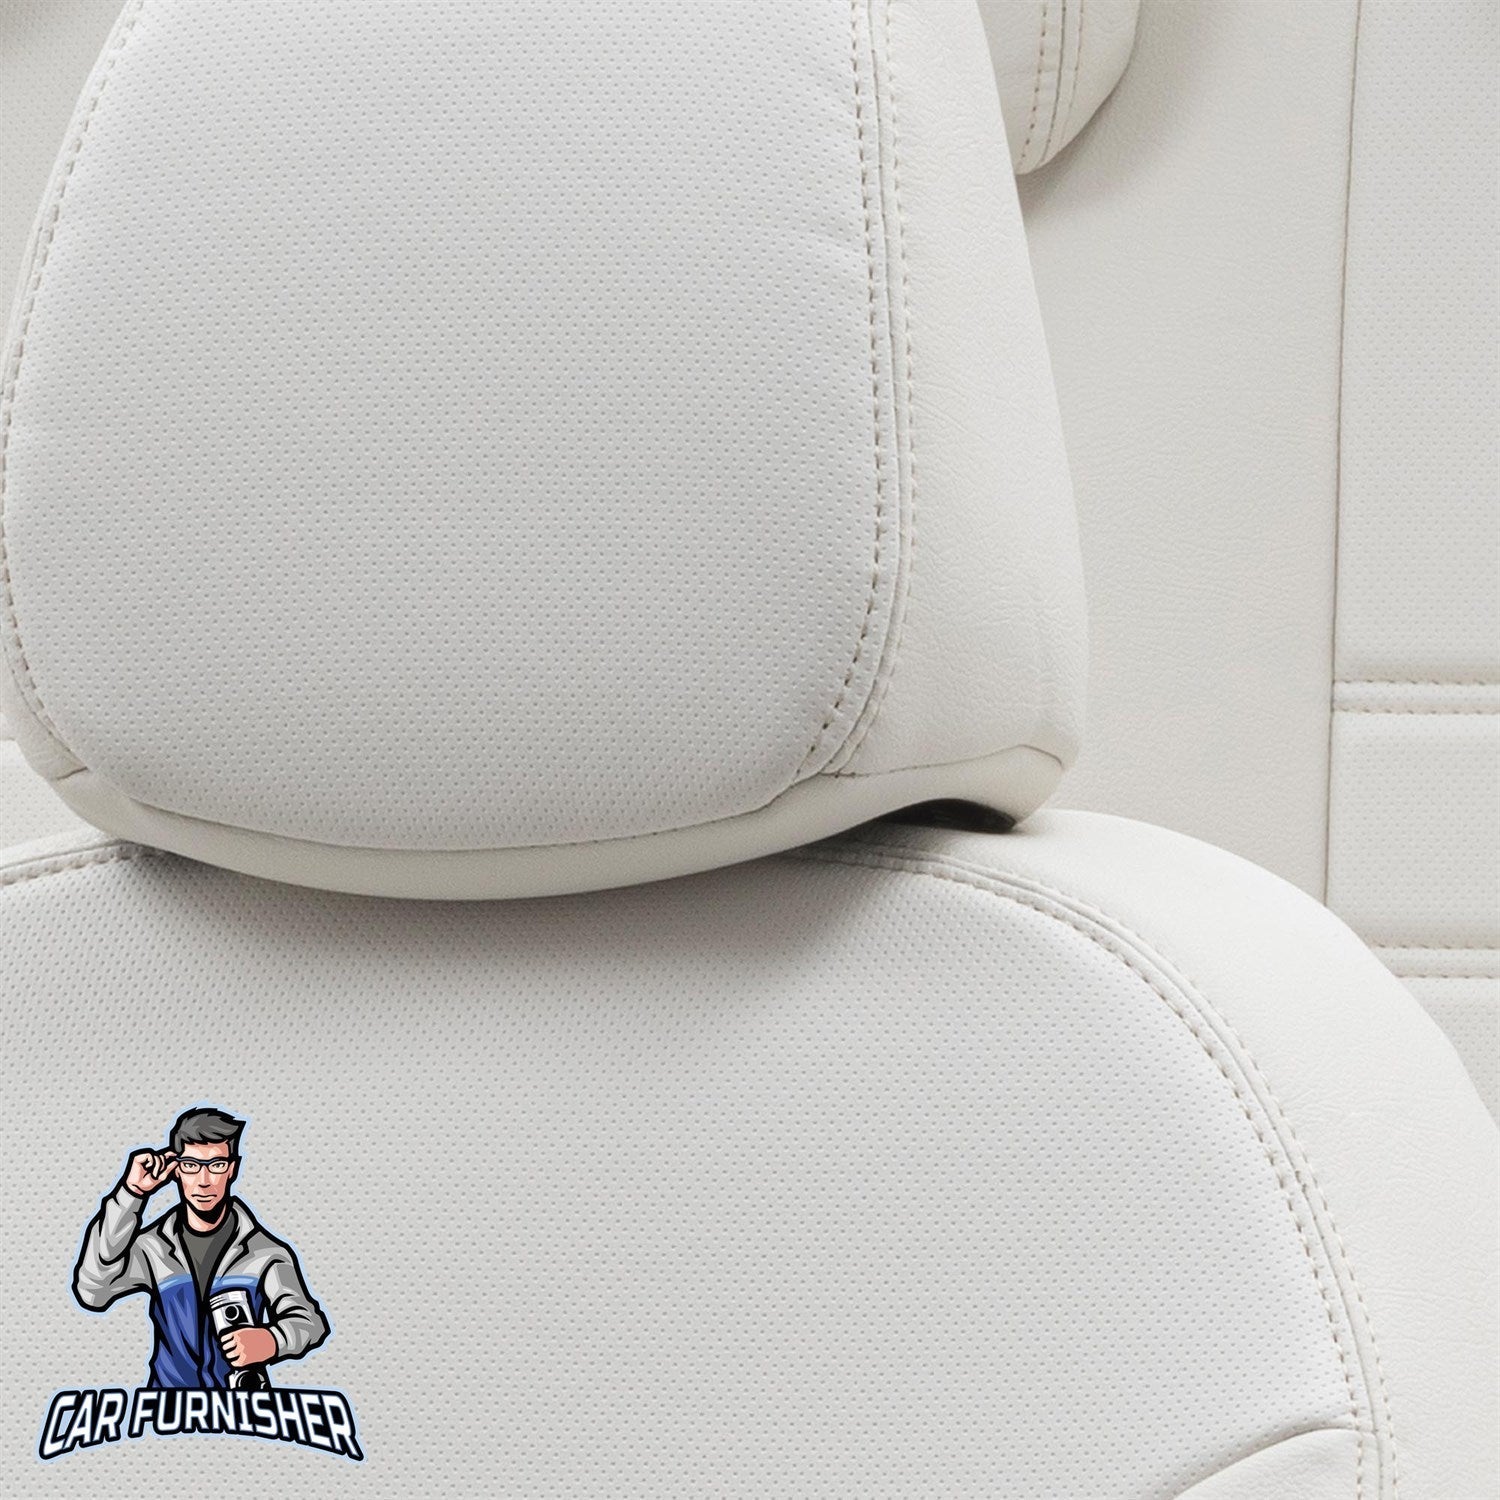 Volvo FH Seat Cover Istanbul Leather Design Ivory Leather